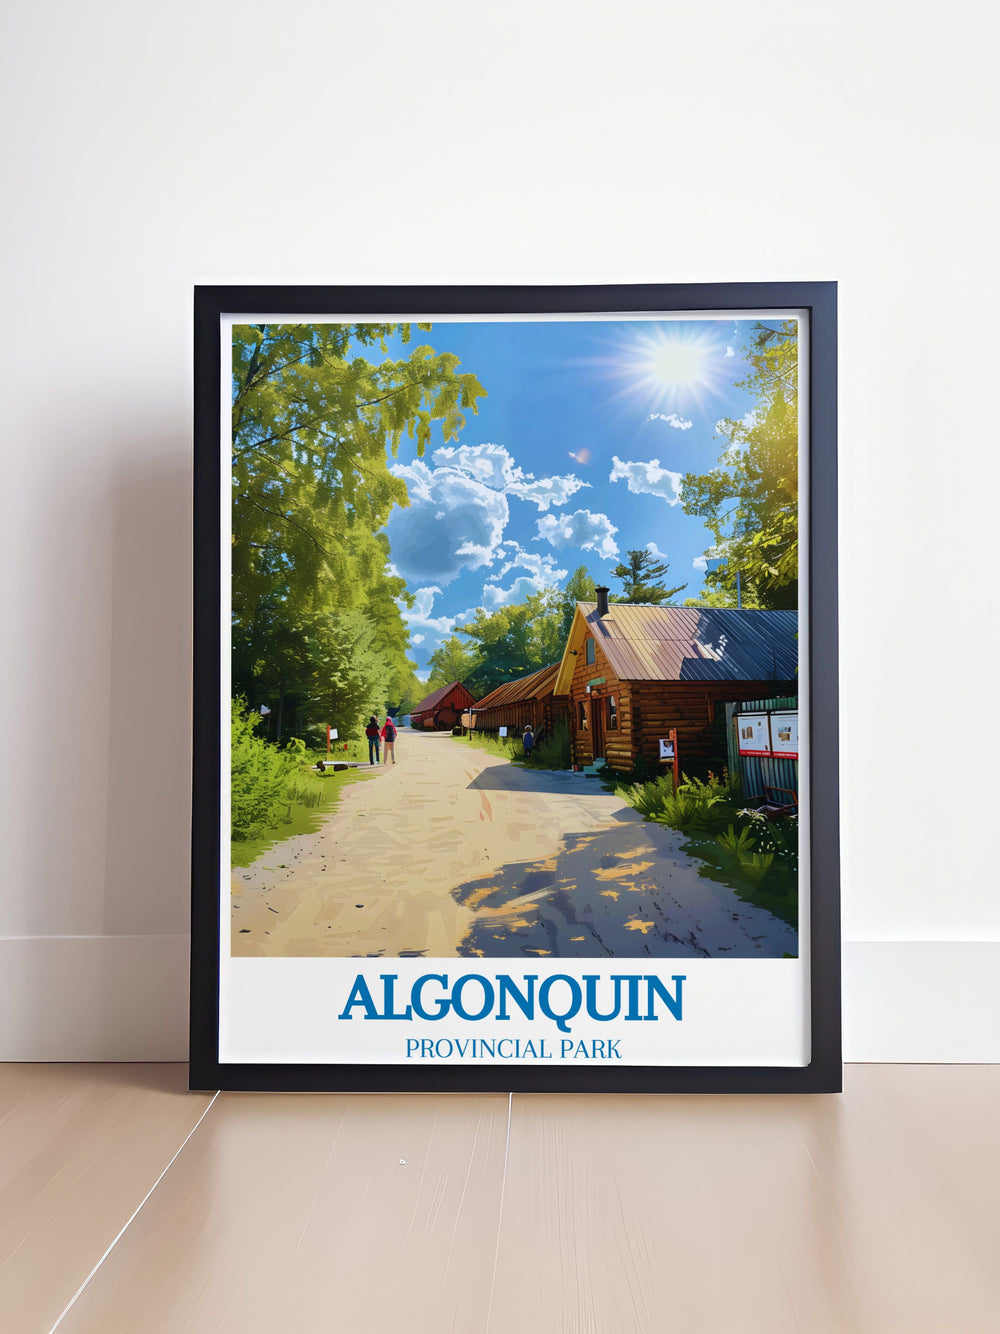 The Algonquin Logging Museum travel poster features a detailed illustration of the museum surrounded by the natural beauty of Algonquin Provincial Park, offering a glimpse into the rich history and stunning landscapes of Canada.